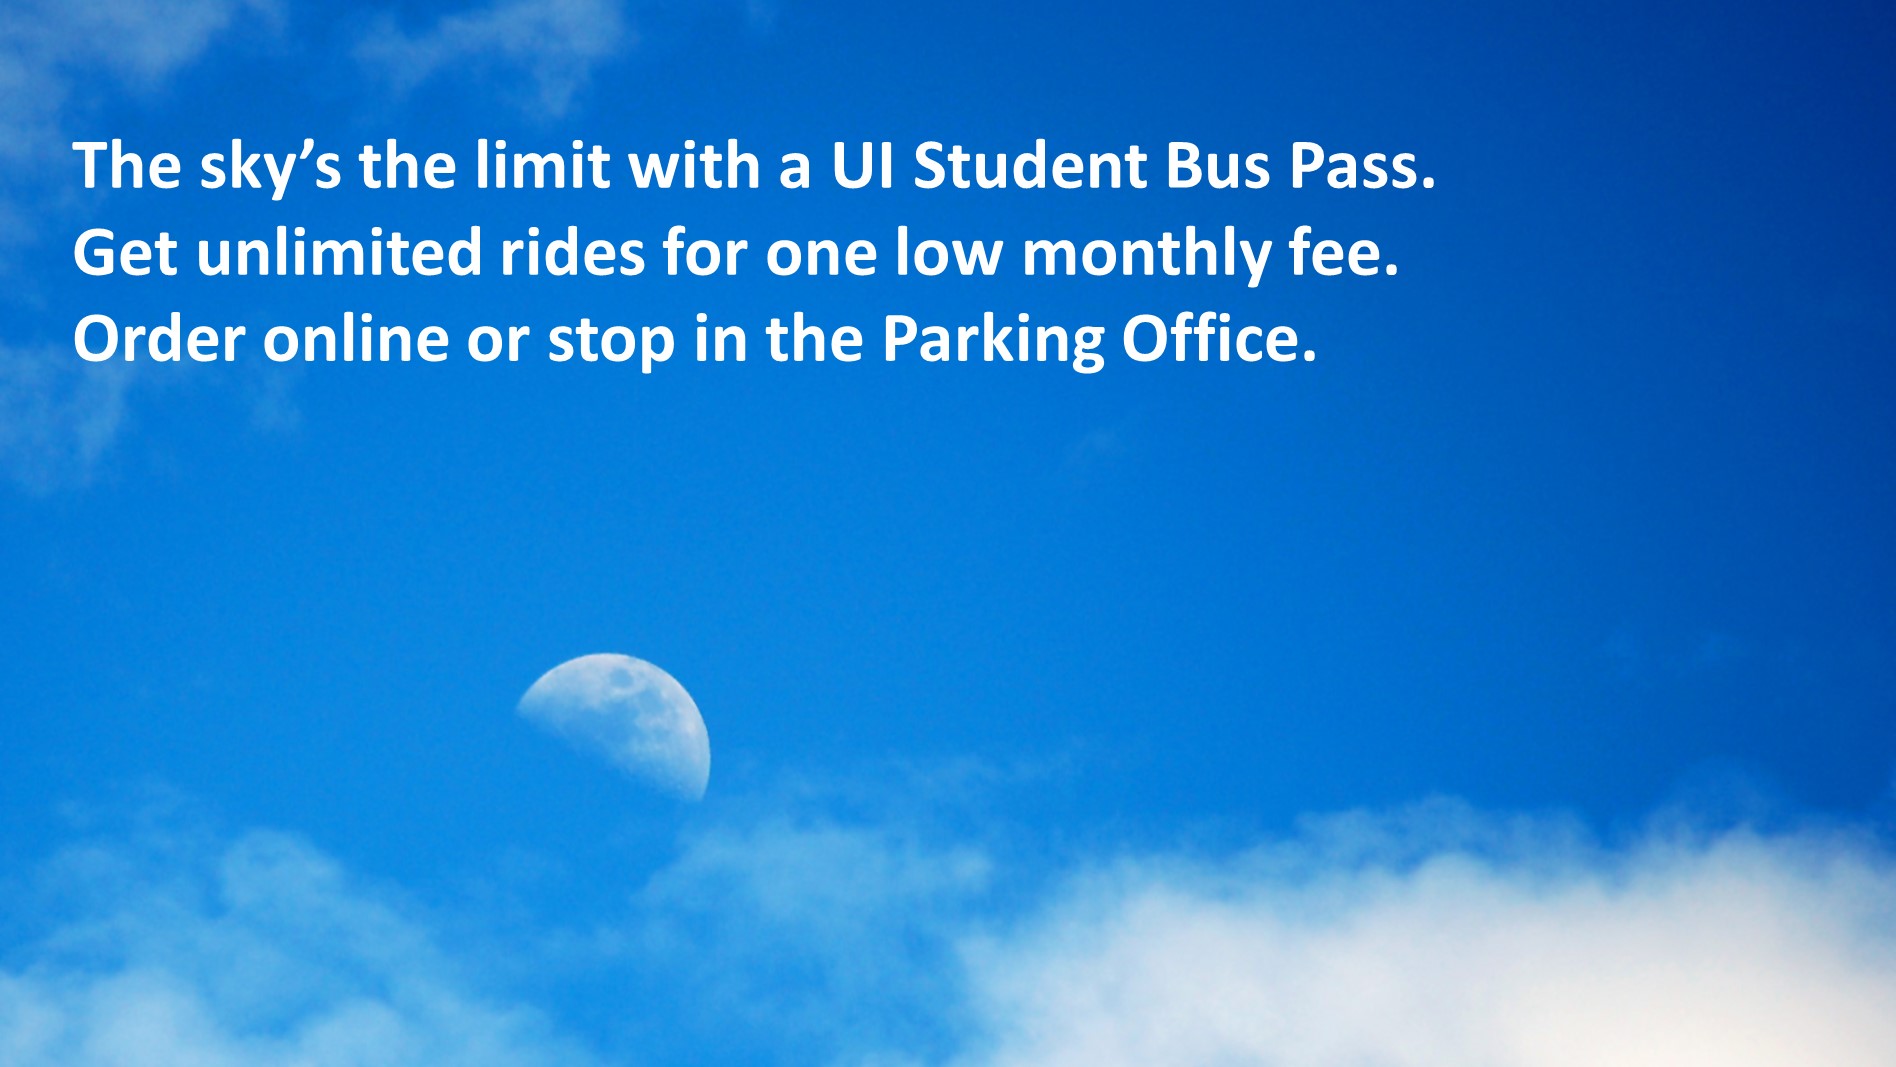 Student bus passe order online or in person